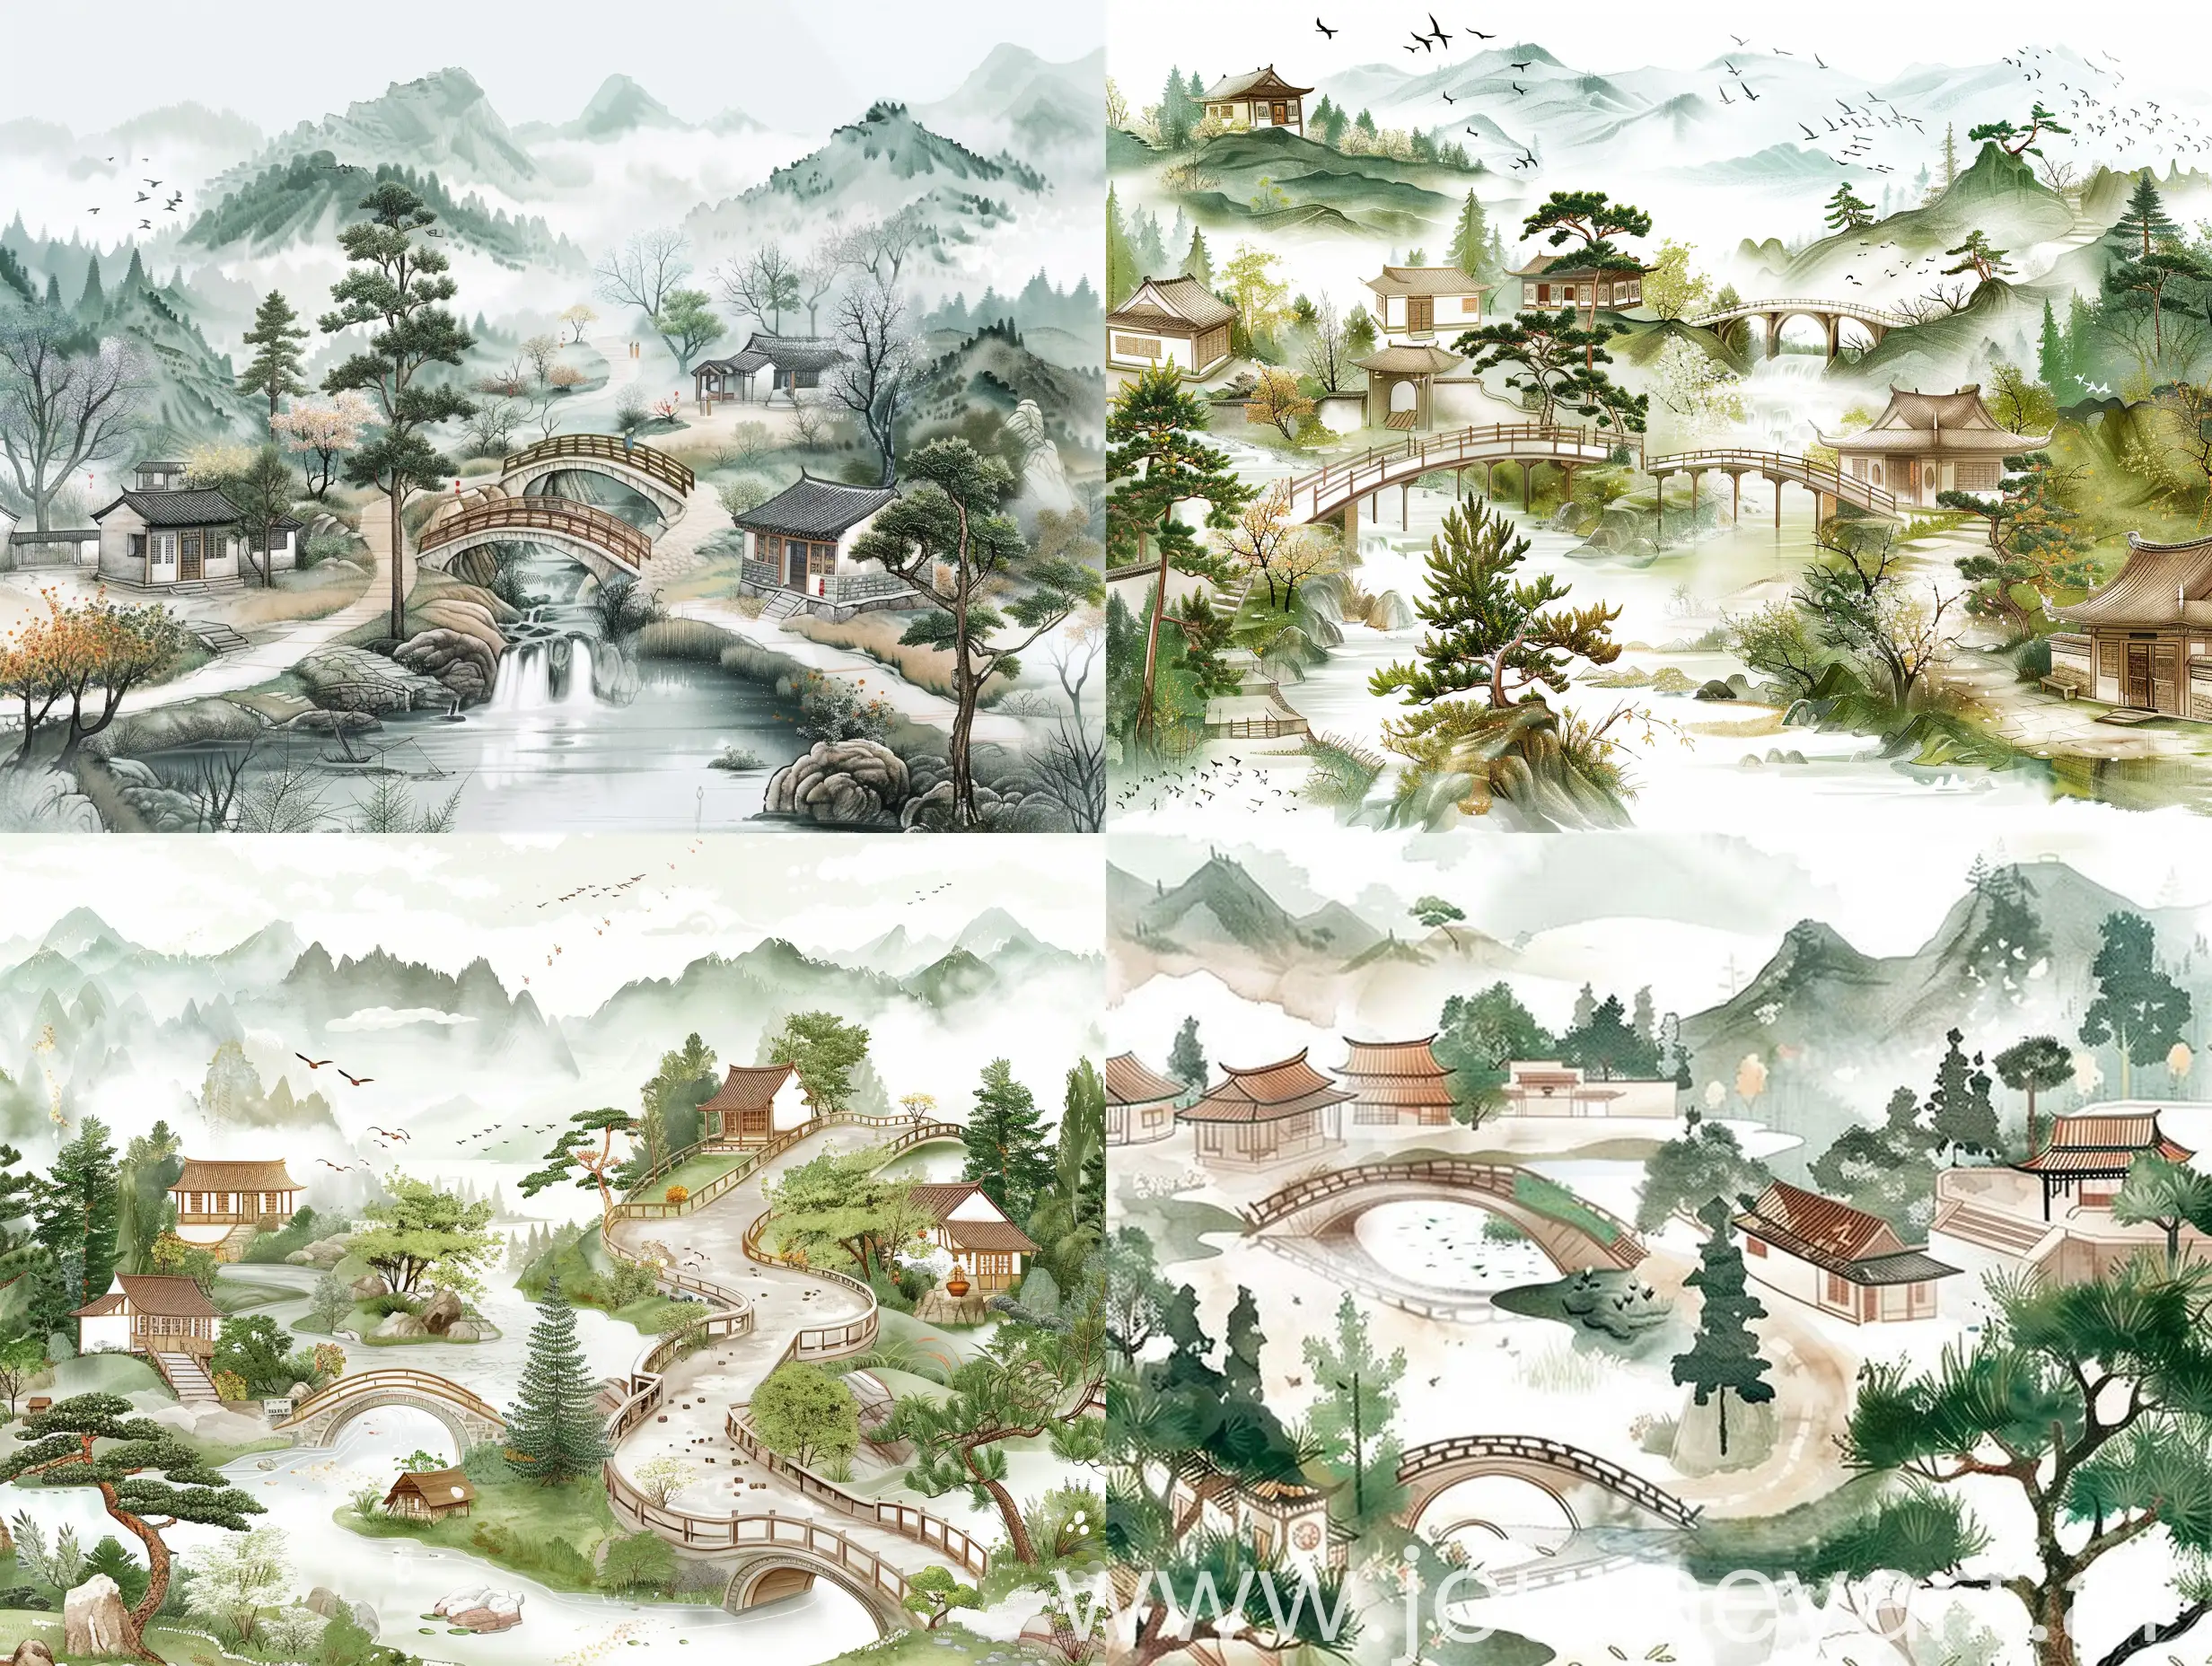 Tranquil-Chinese-Ink-Landscape-Serene-Village-with-Bridges-Water-and-Pine-Trees